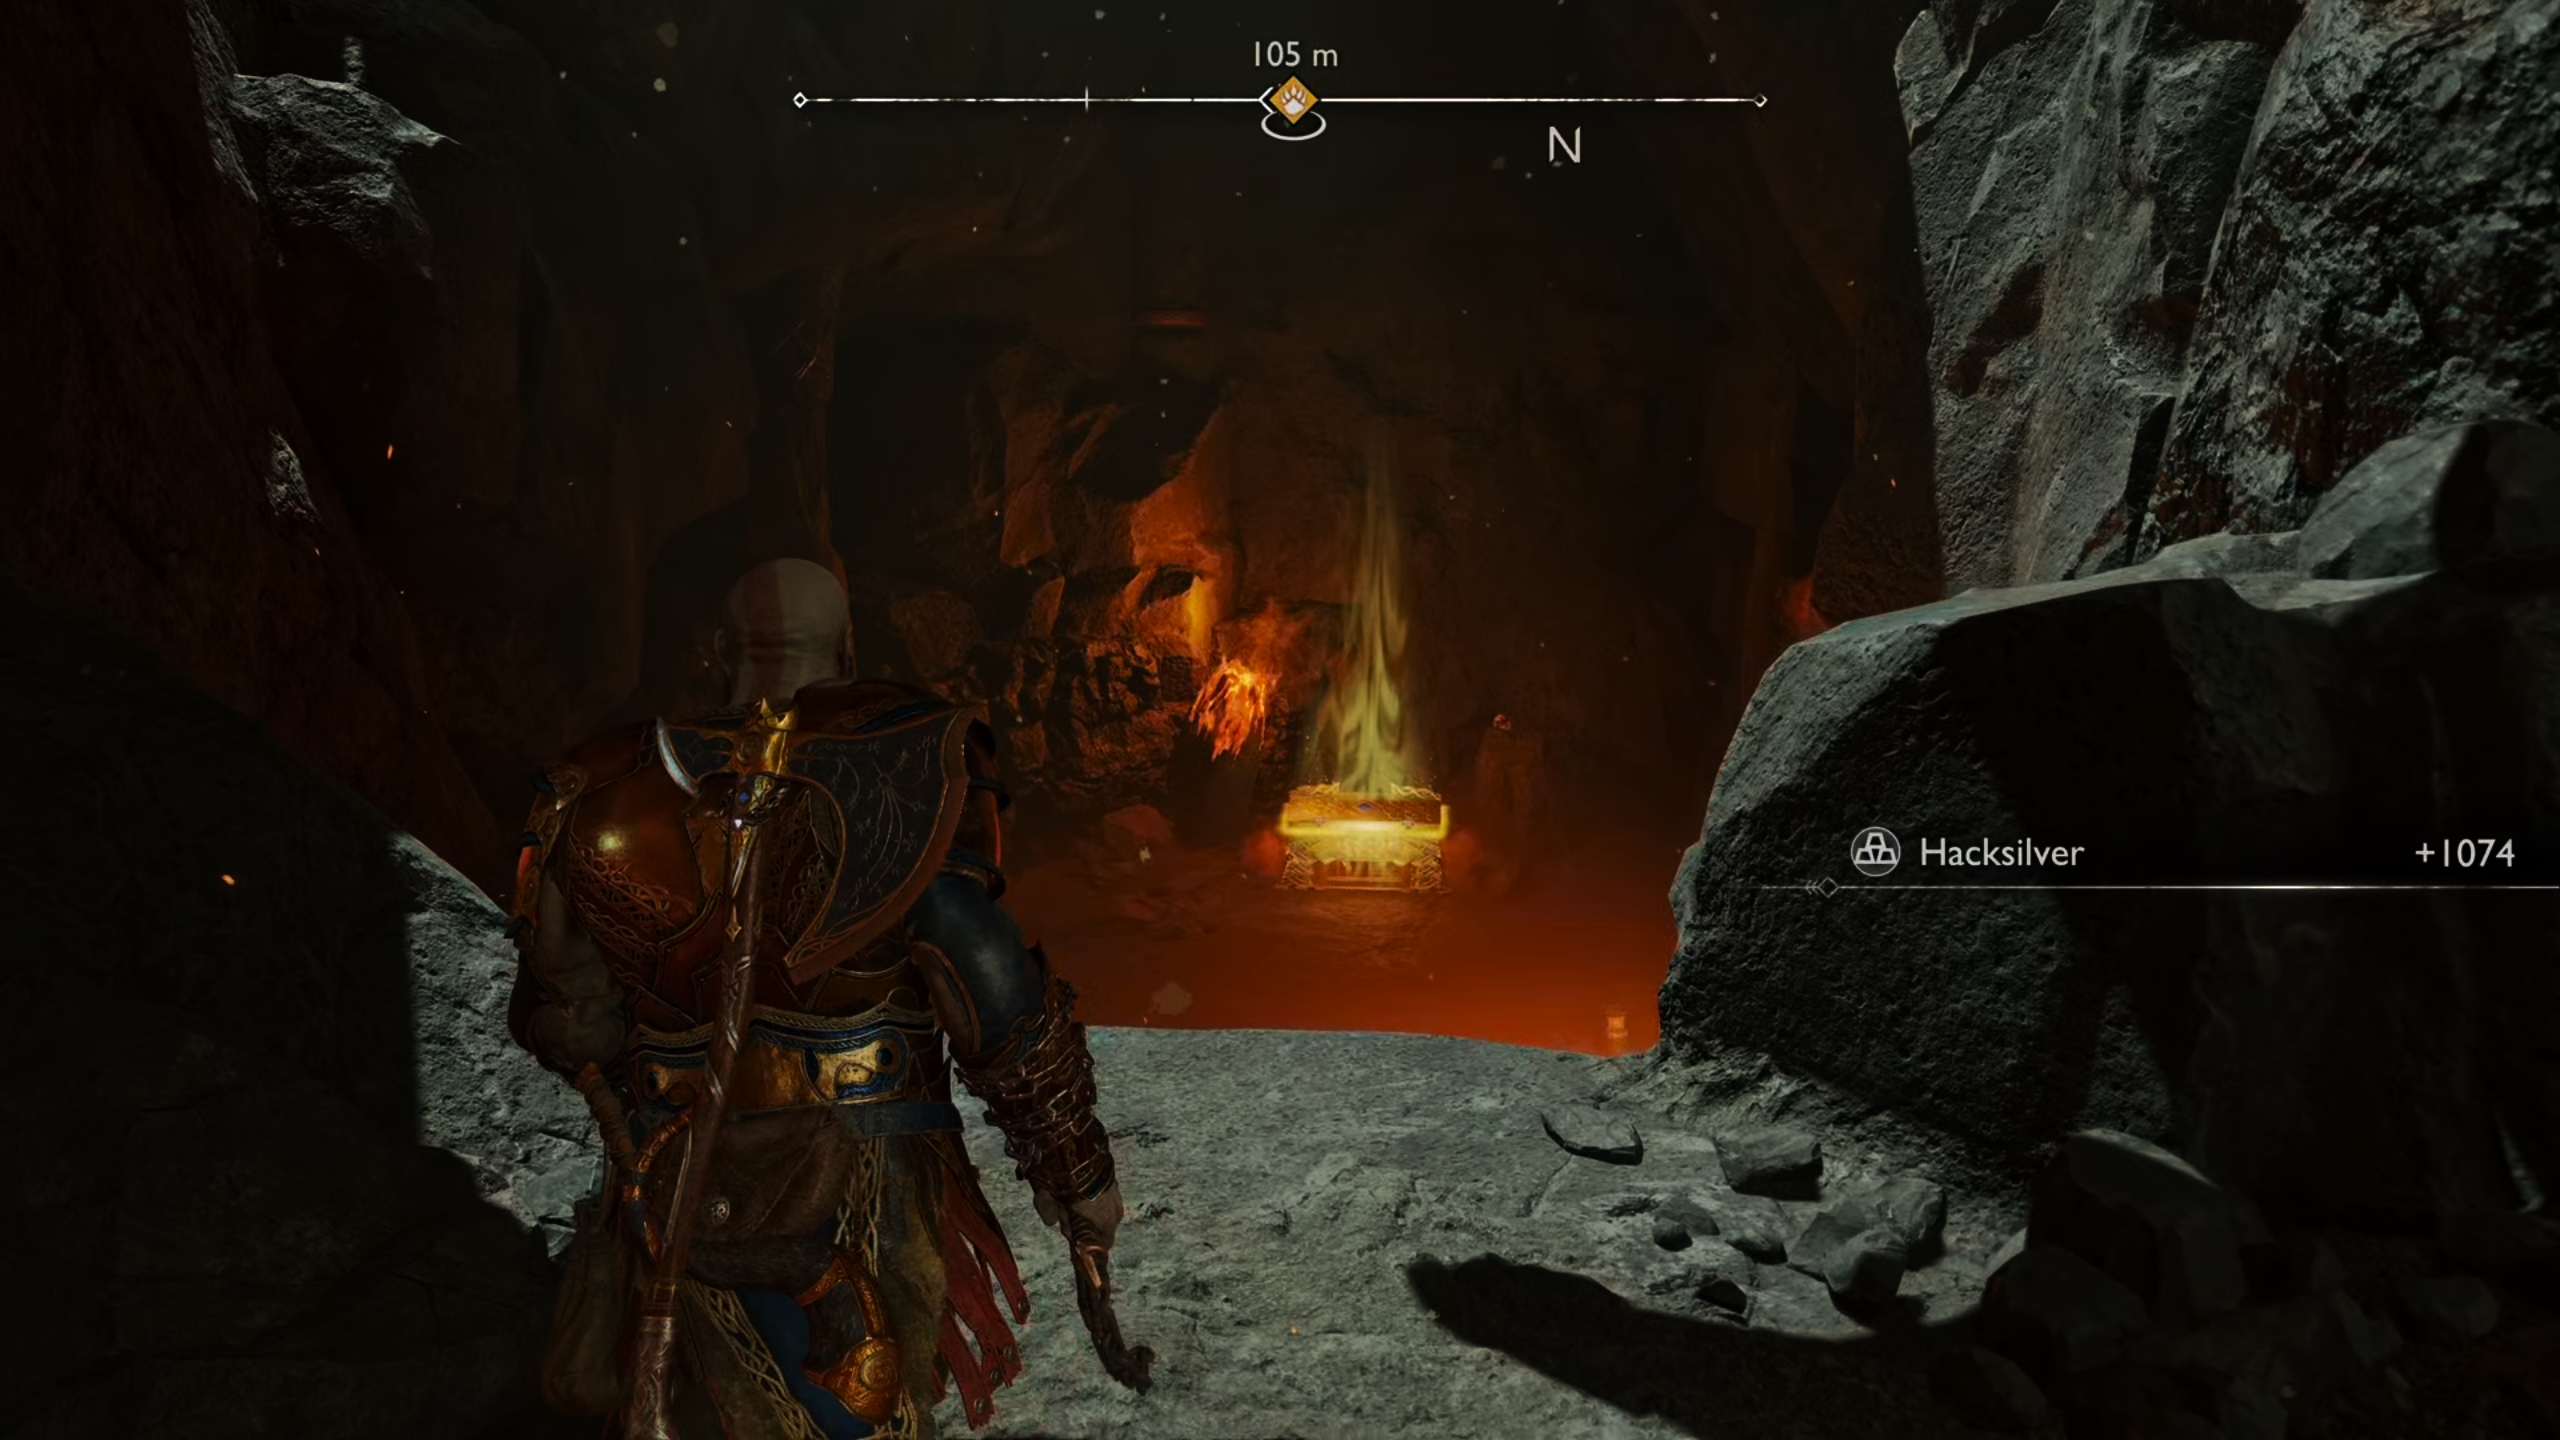 You will find the Legendary Chest in the cave as you look north after jumping down to the southwest from the Mystic Gateway.